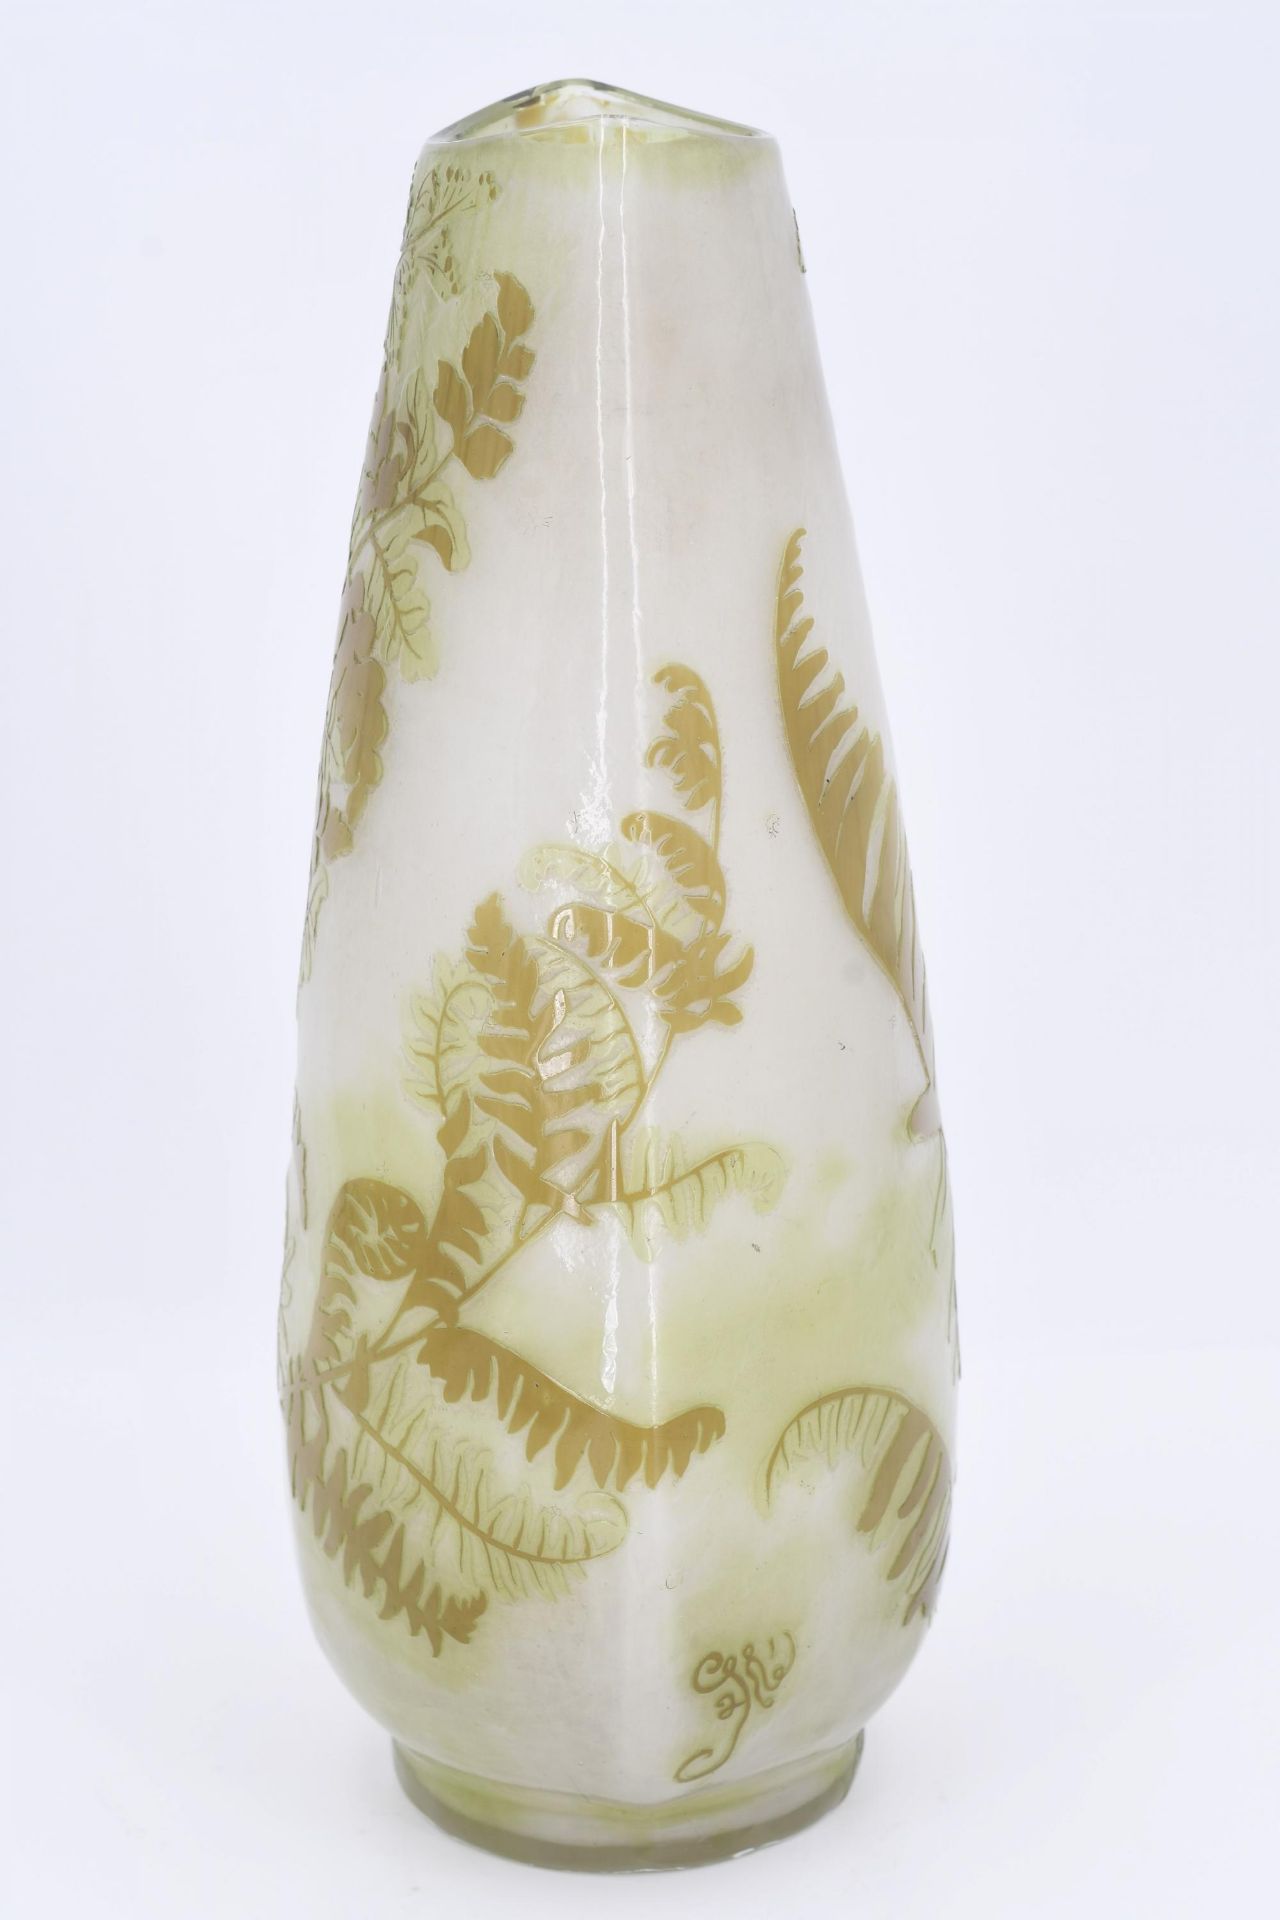 Small glass vase with floral décor - Image 11 of 13